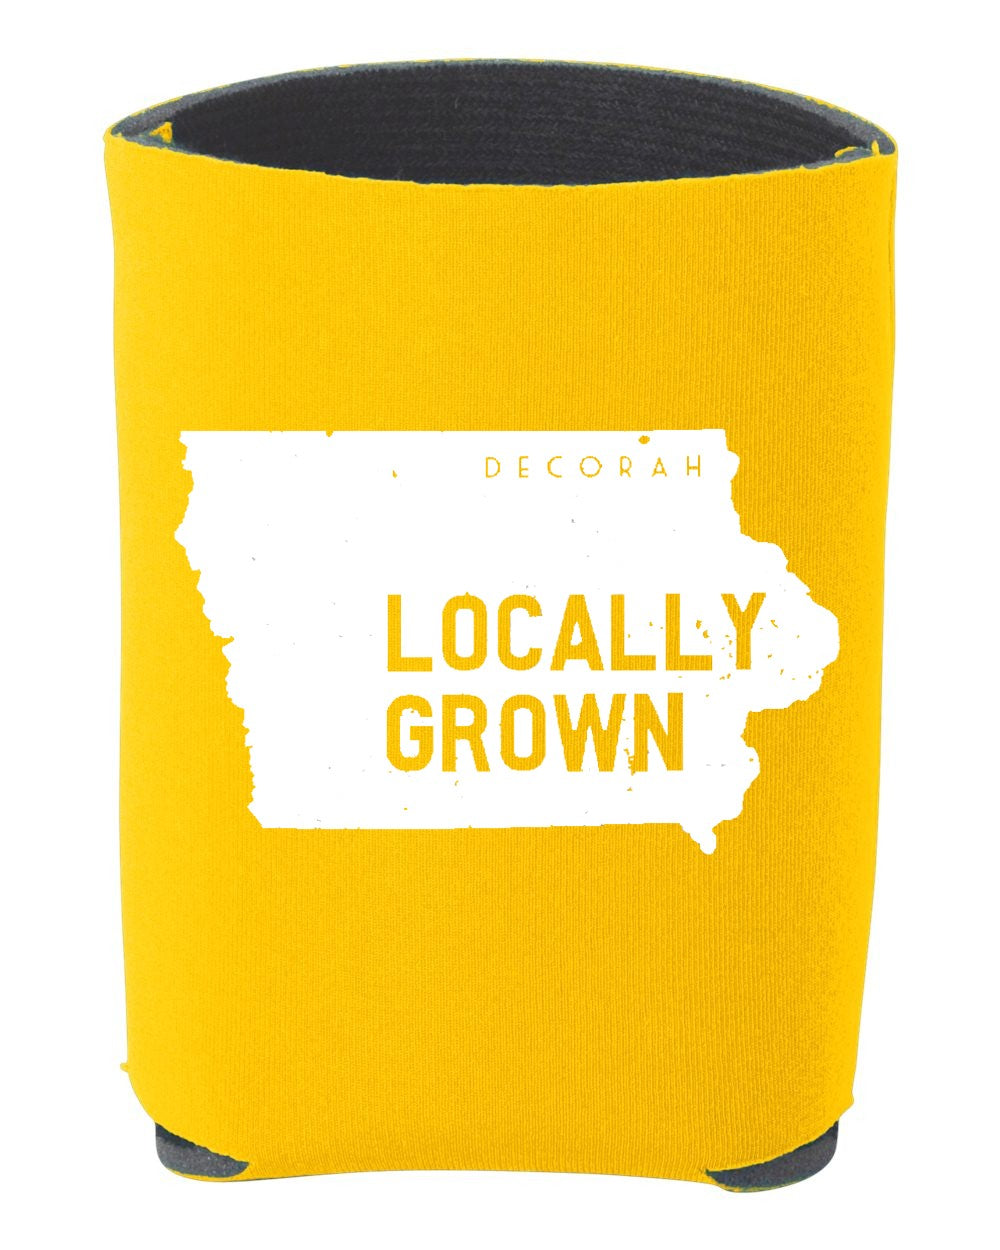 Locally Grown - Koozie - Multiple Color Options